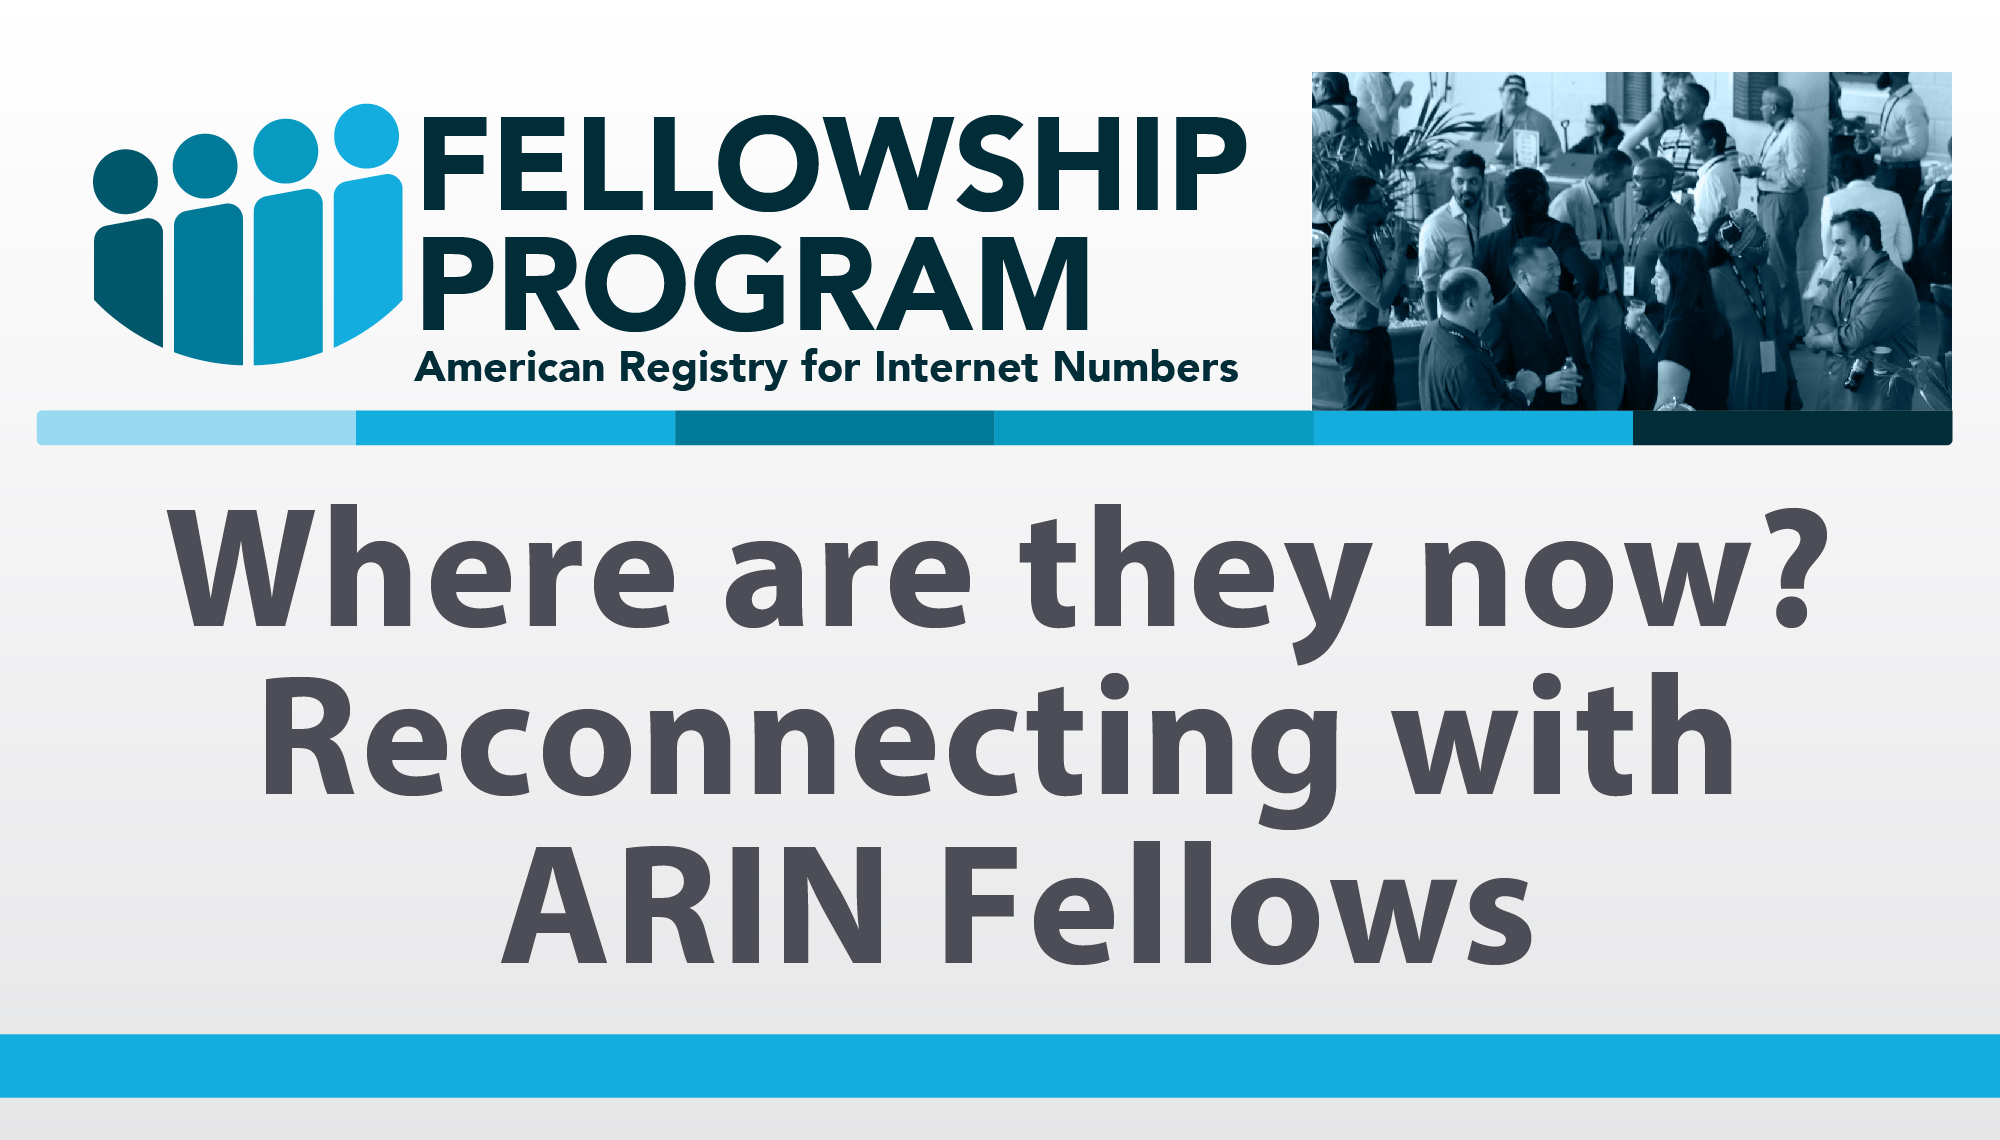 Where are they now? Reconnecting with ARIN Fellows